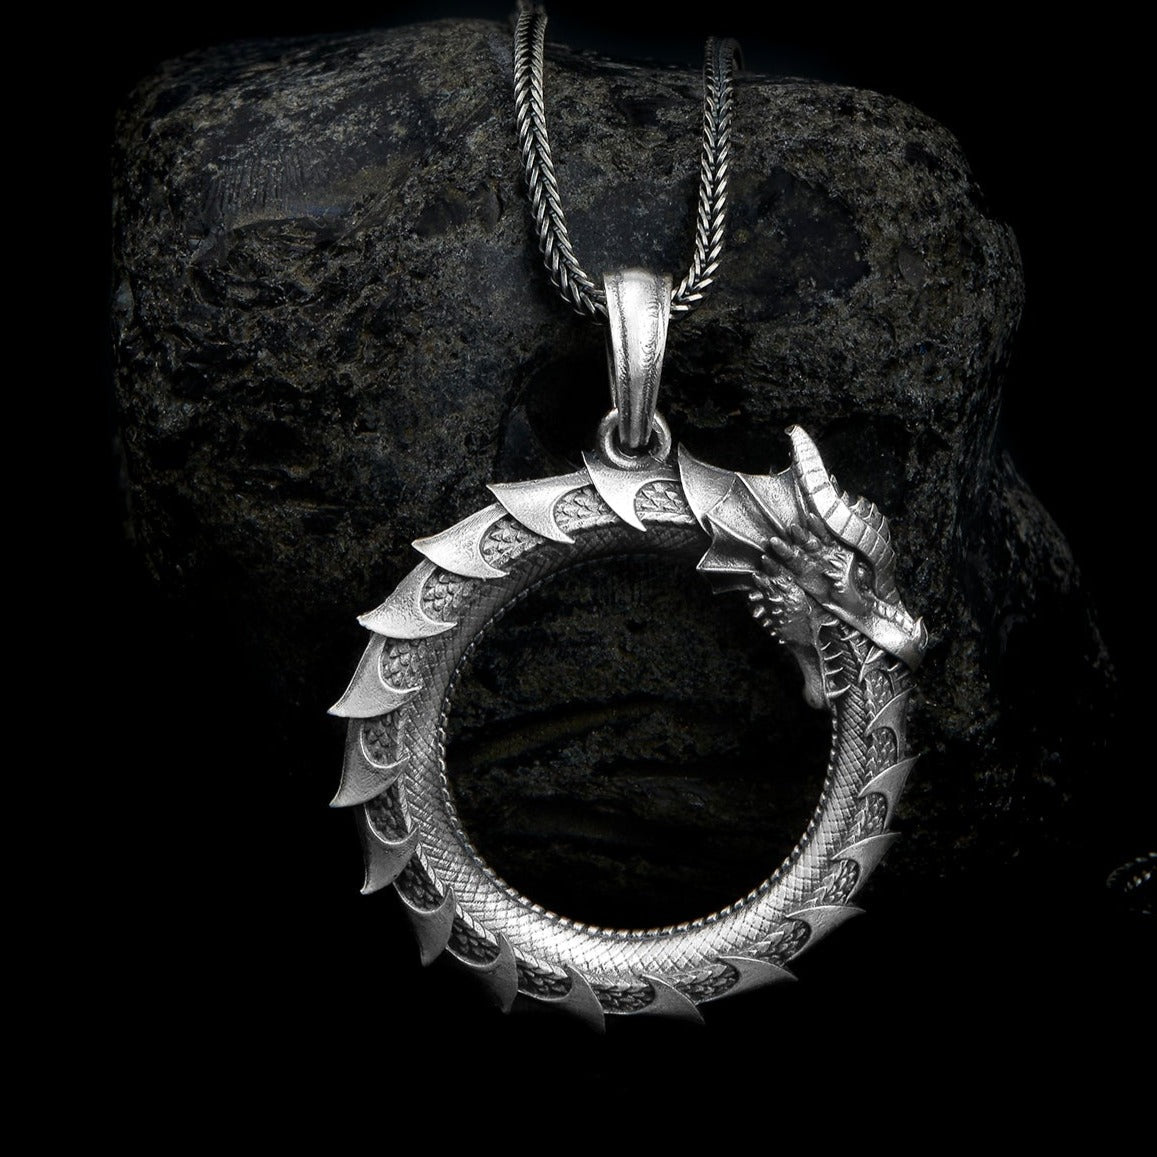 Handcrafted sterling silver necklace showcasing a meticulously detailed Ouroboros, a symbol of eternity, on a delicate chain.